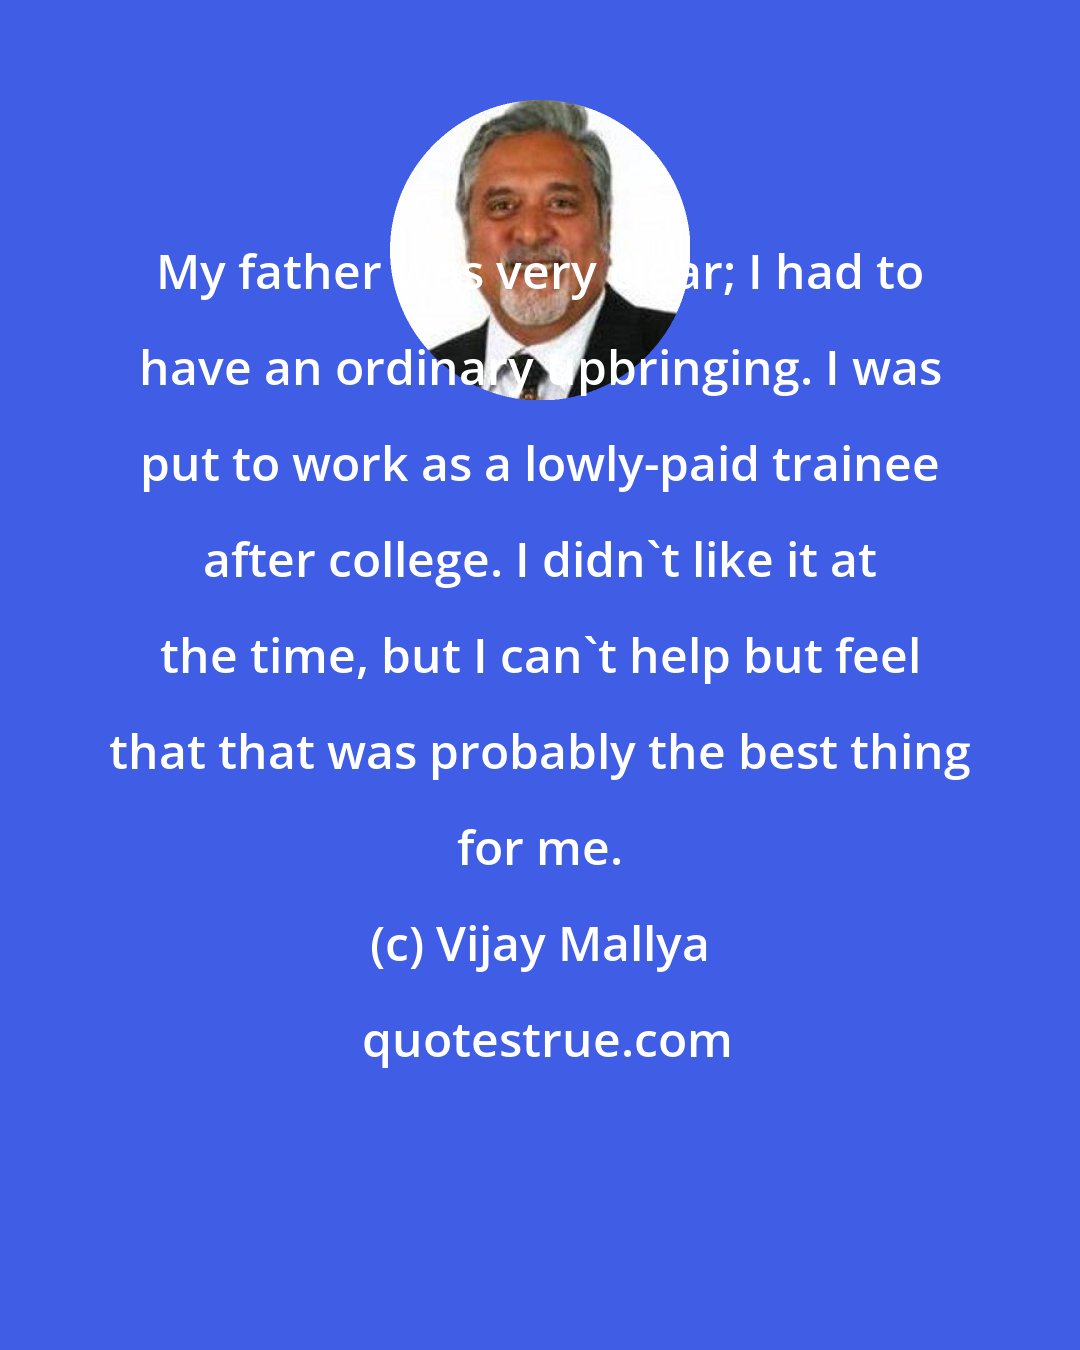 Vijay Mallya: My father was very clear; I had to have an ordinary upbringing. I was put to work as a lowly-paid trainee after college. I didn't like it at the time, but I can't help but feel that that was probably the best thing for me.